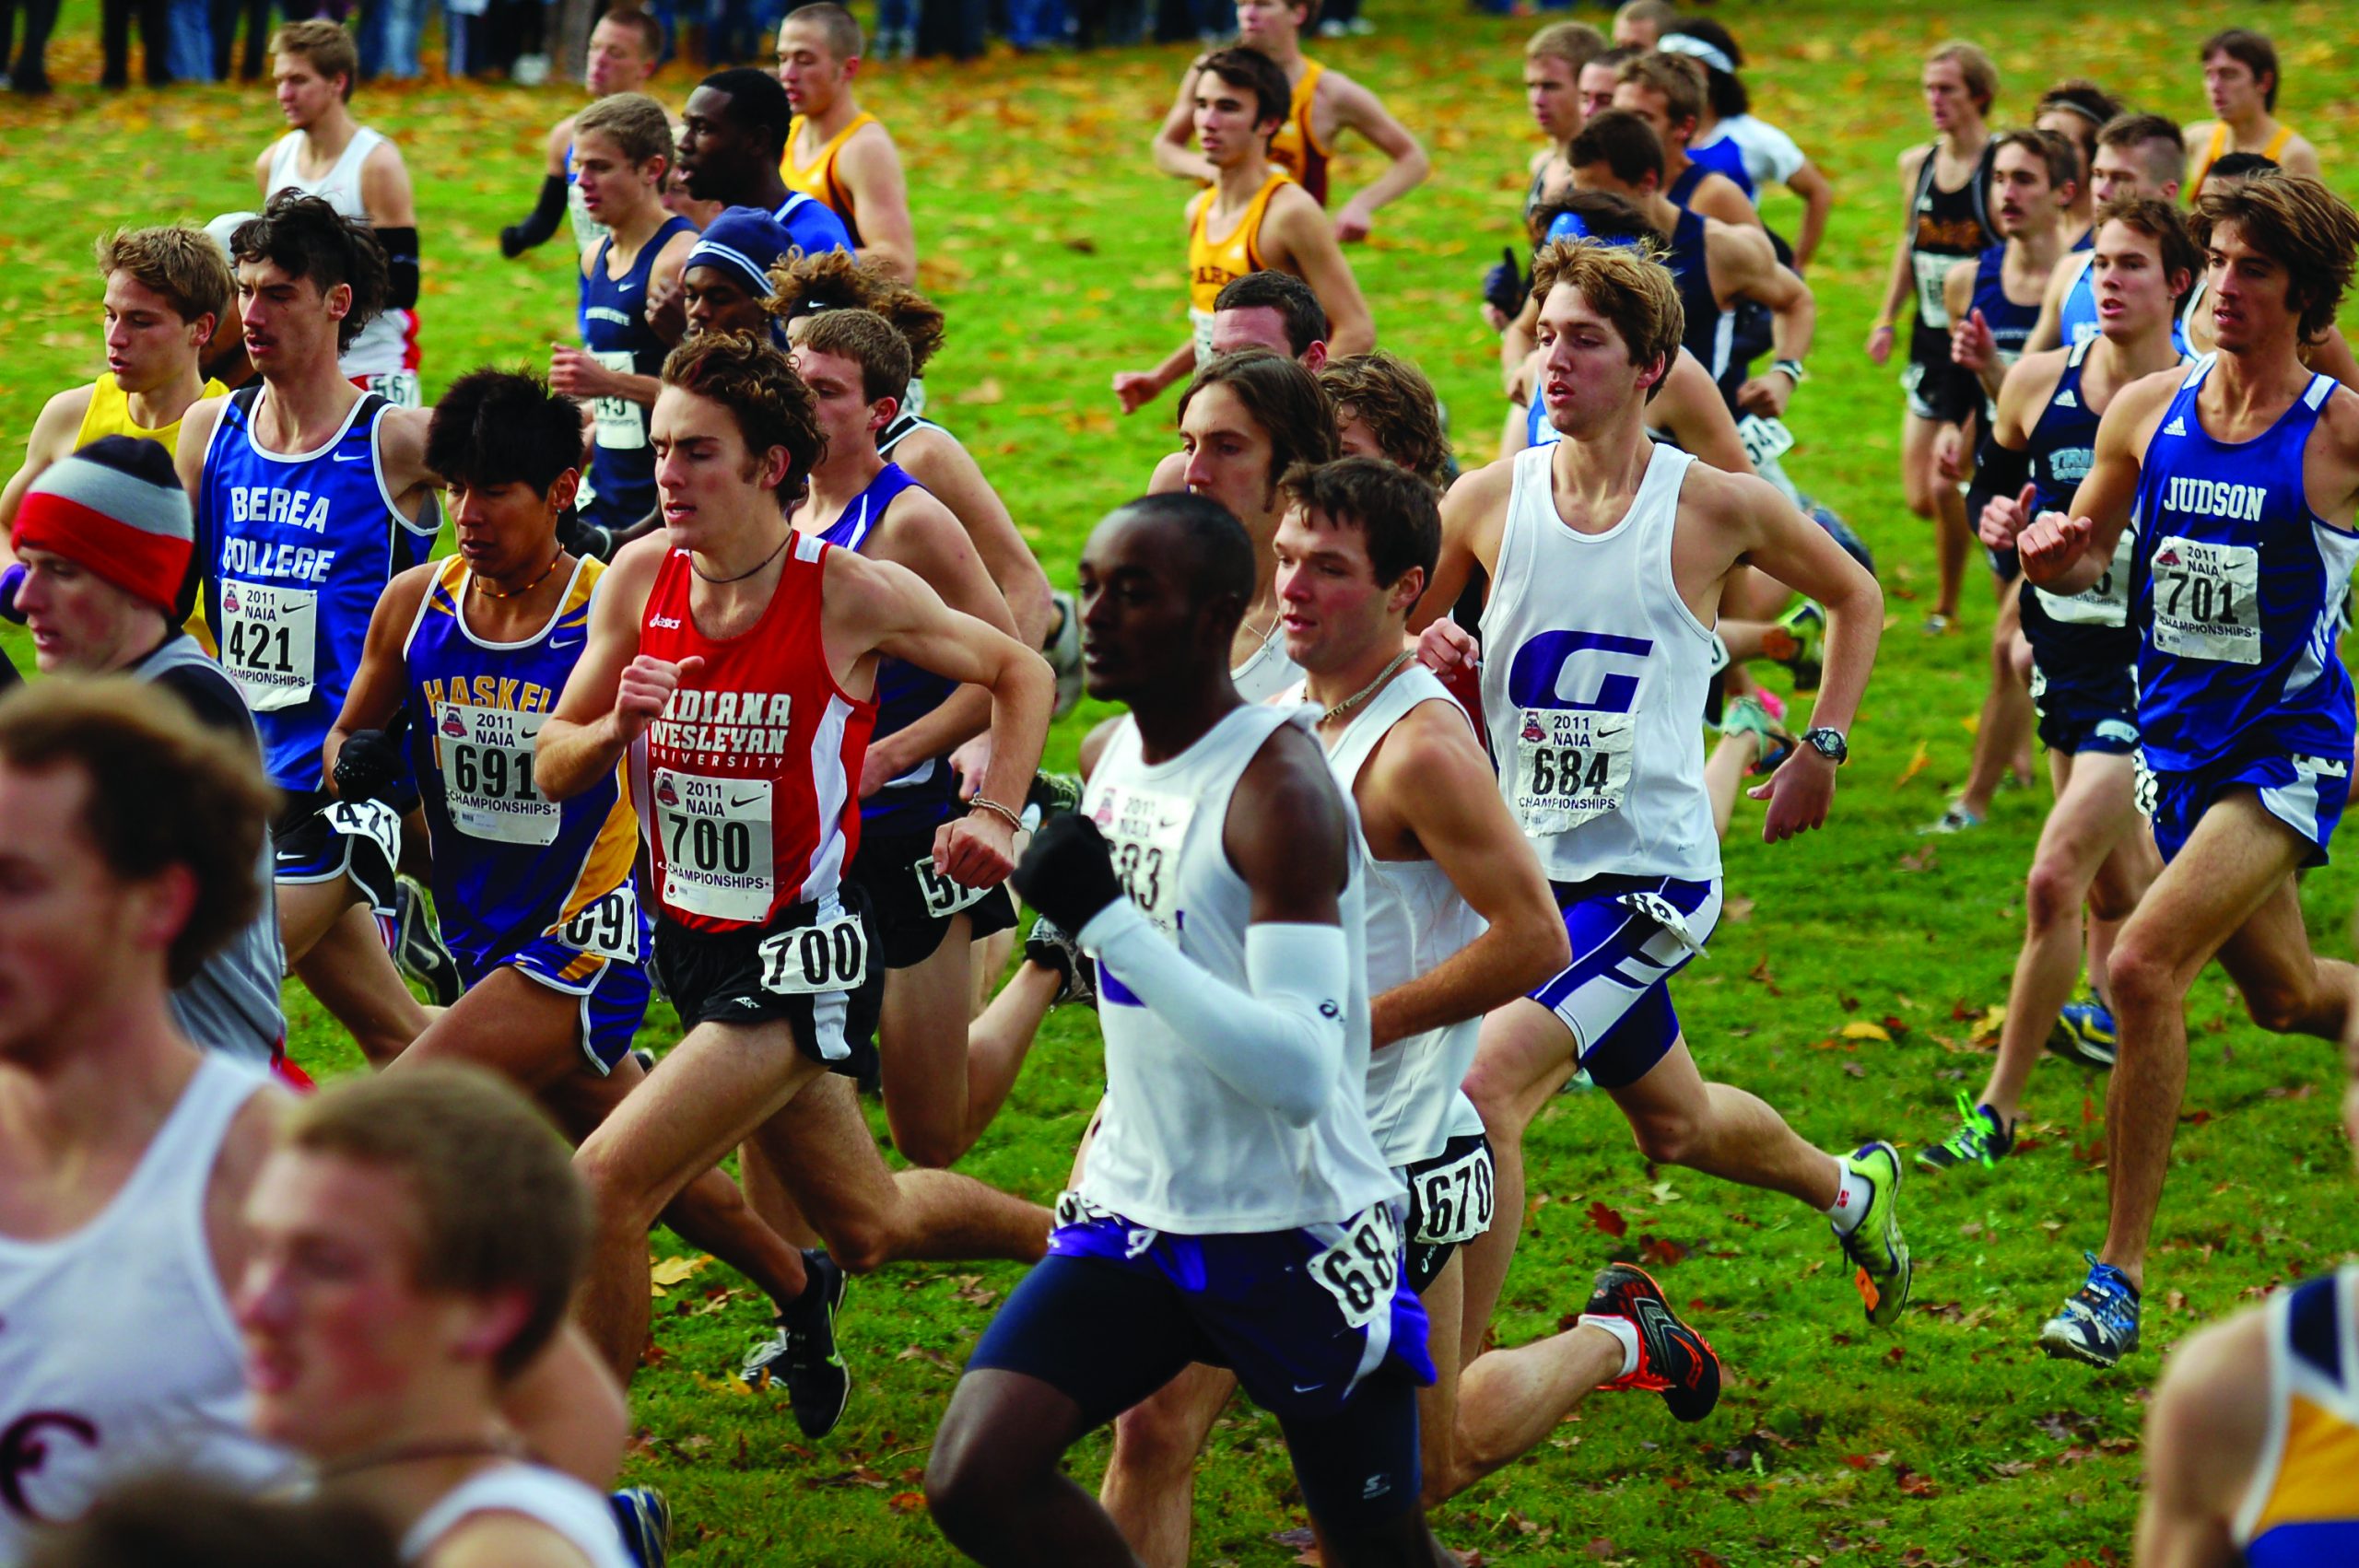 Oscar Joses Kirwa and Jordan Smeltzer race against many other runners from opposing teams